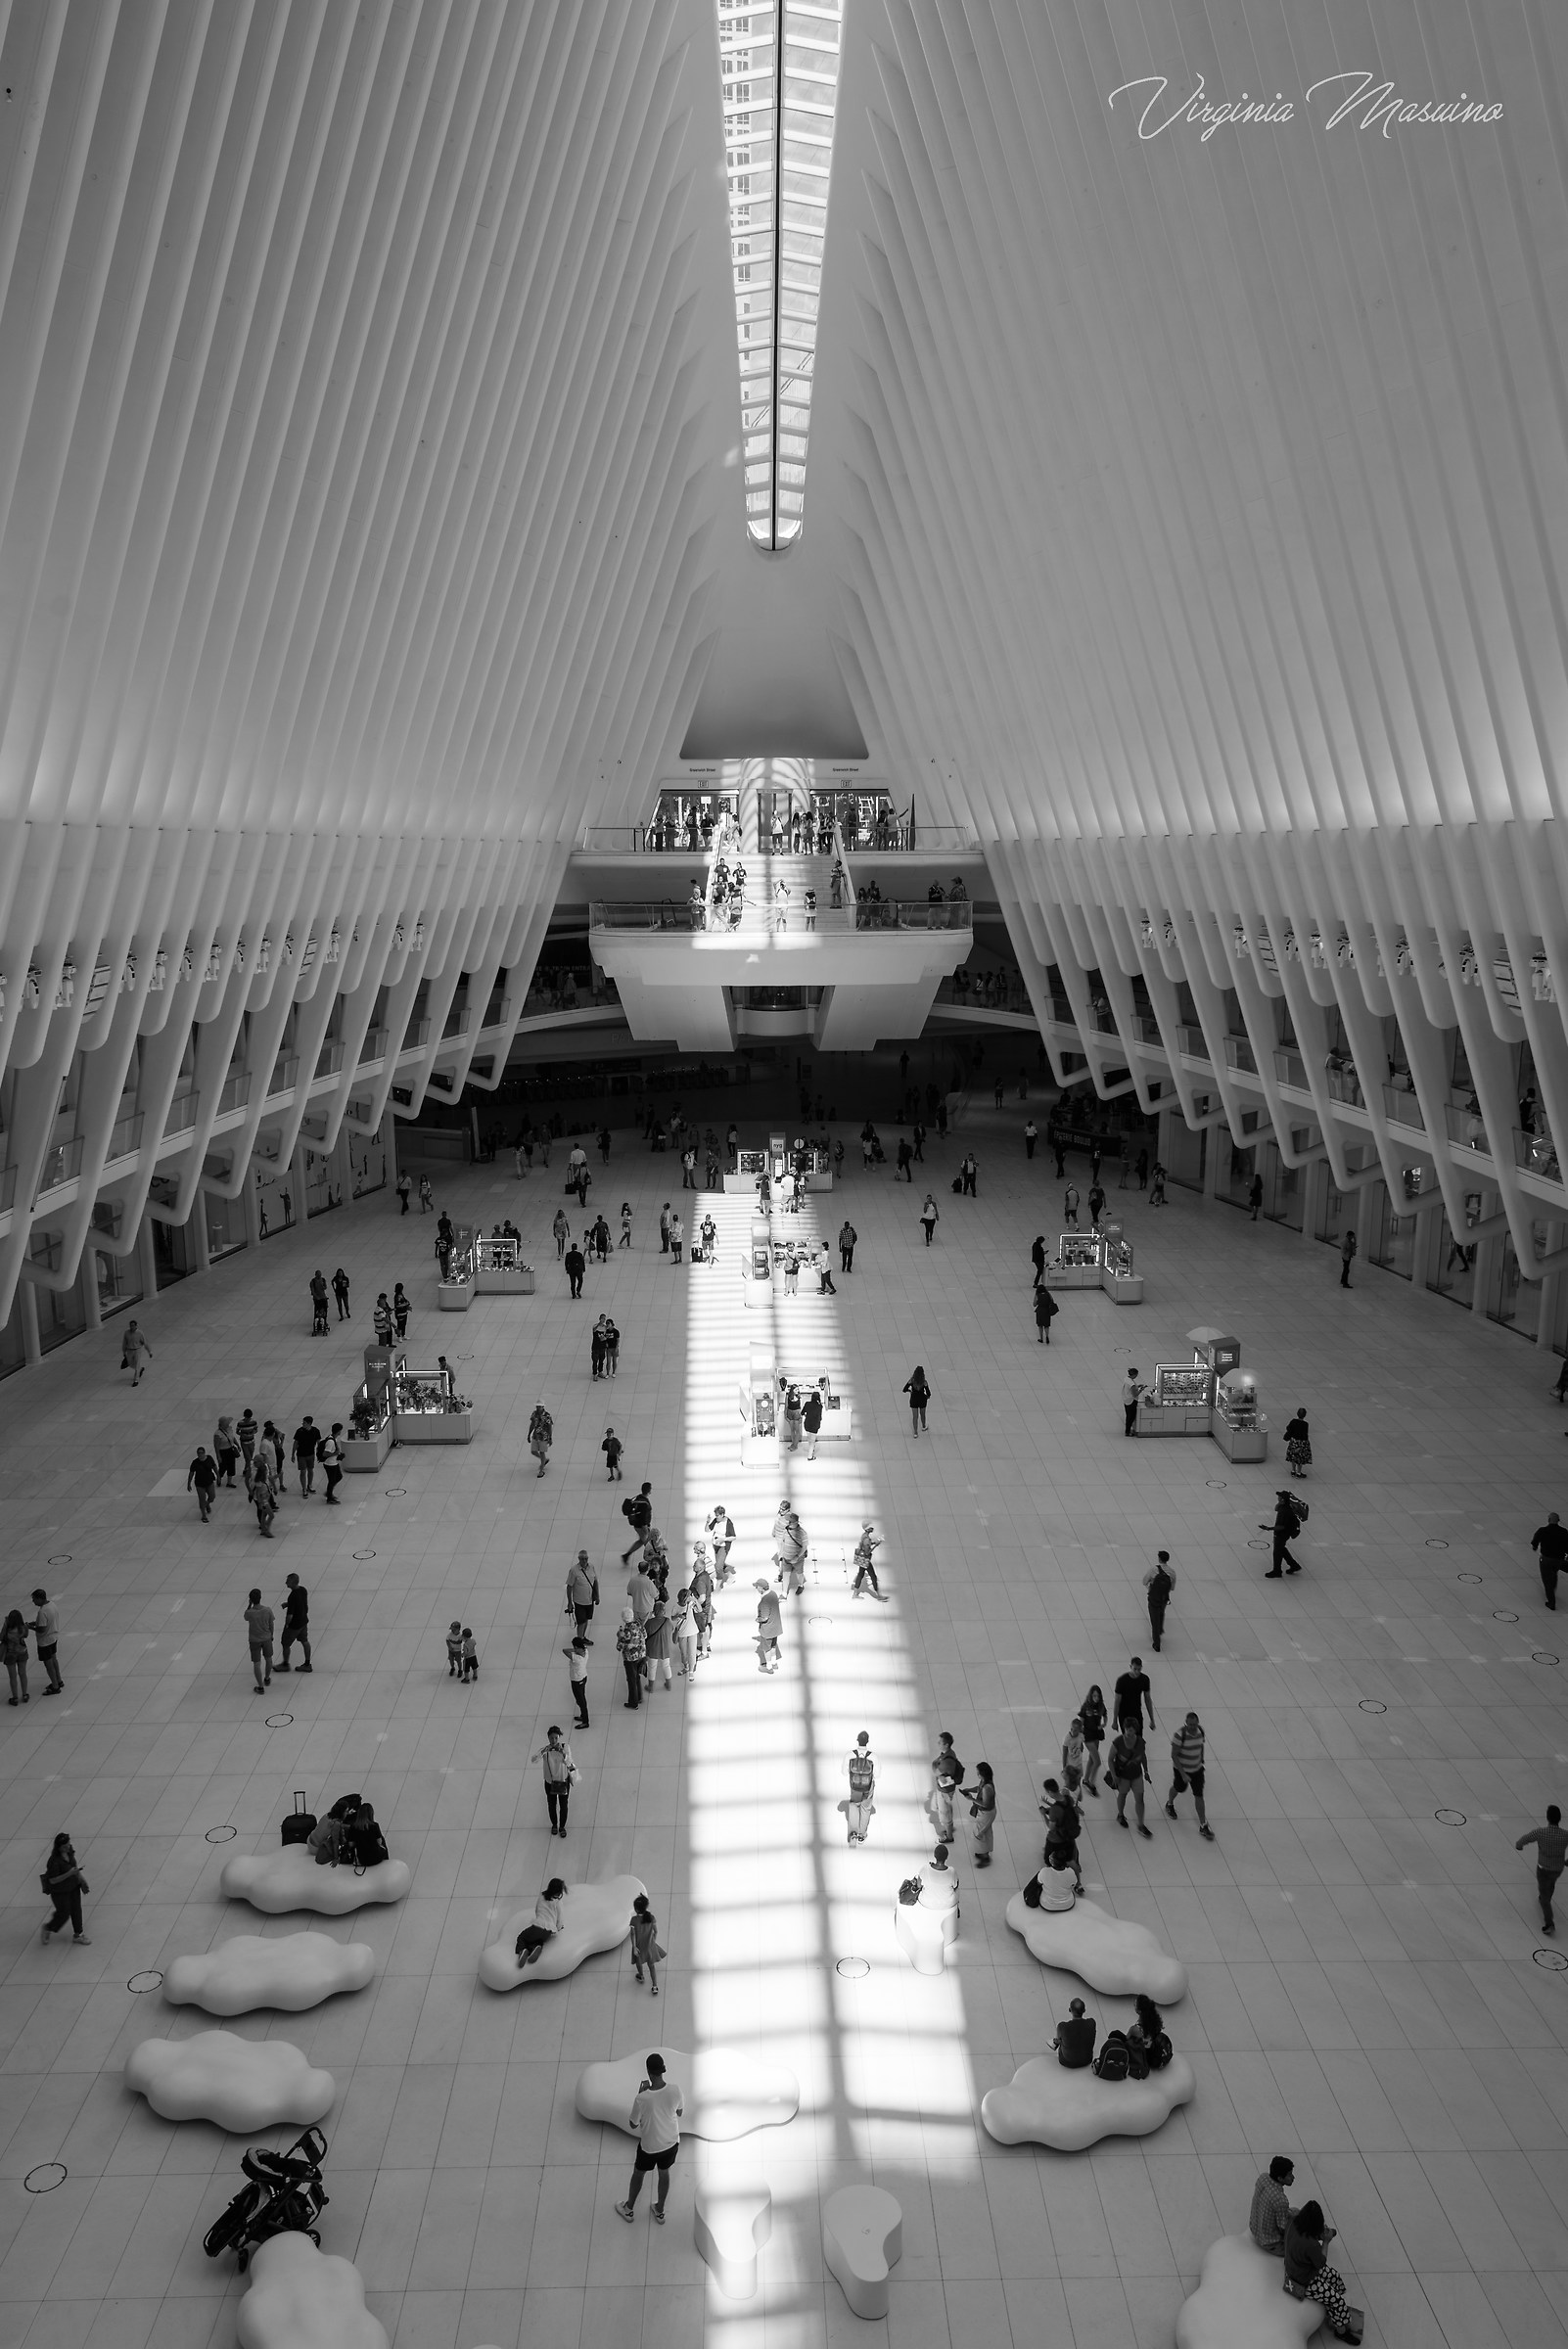 The Oculus at the World Trade Center...